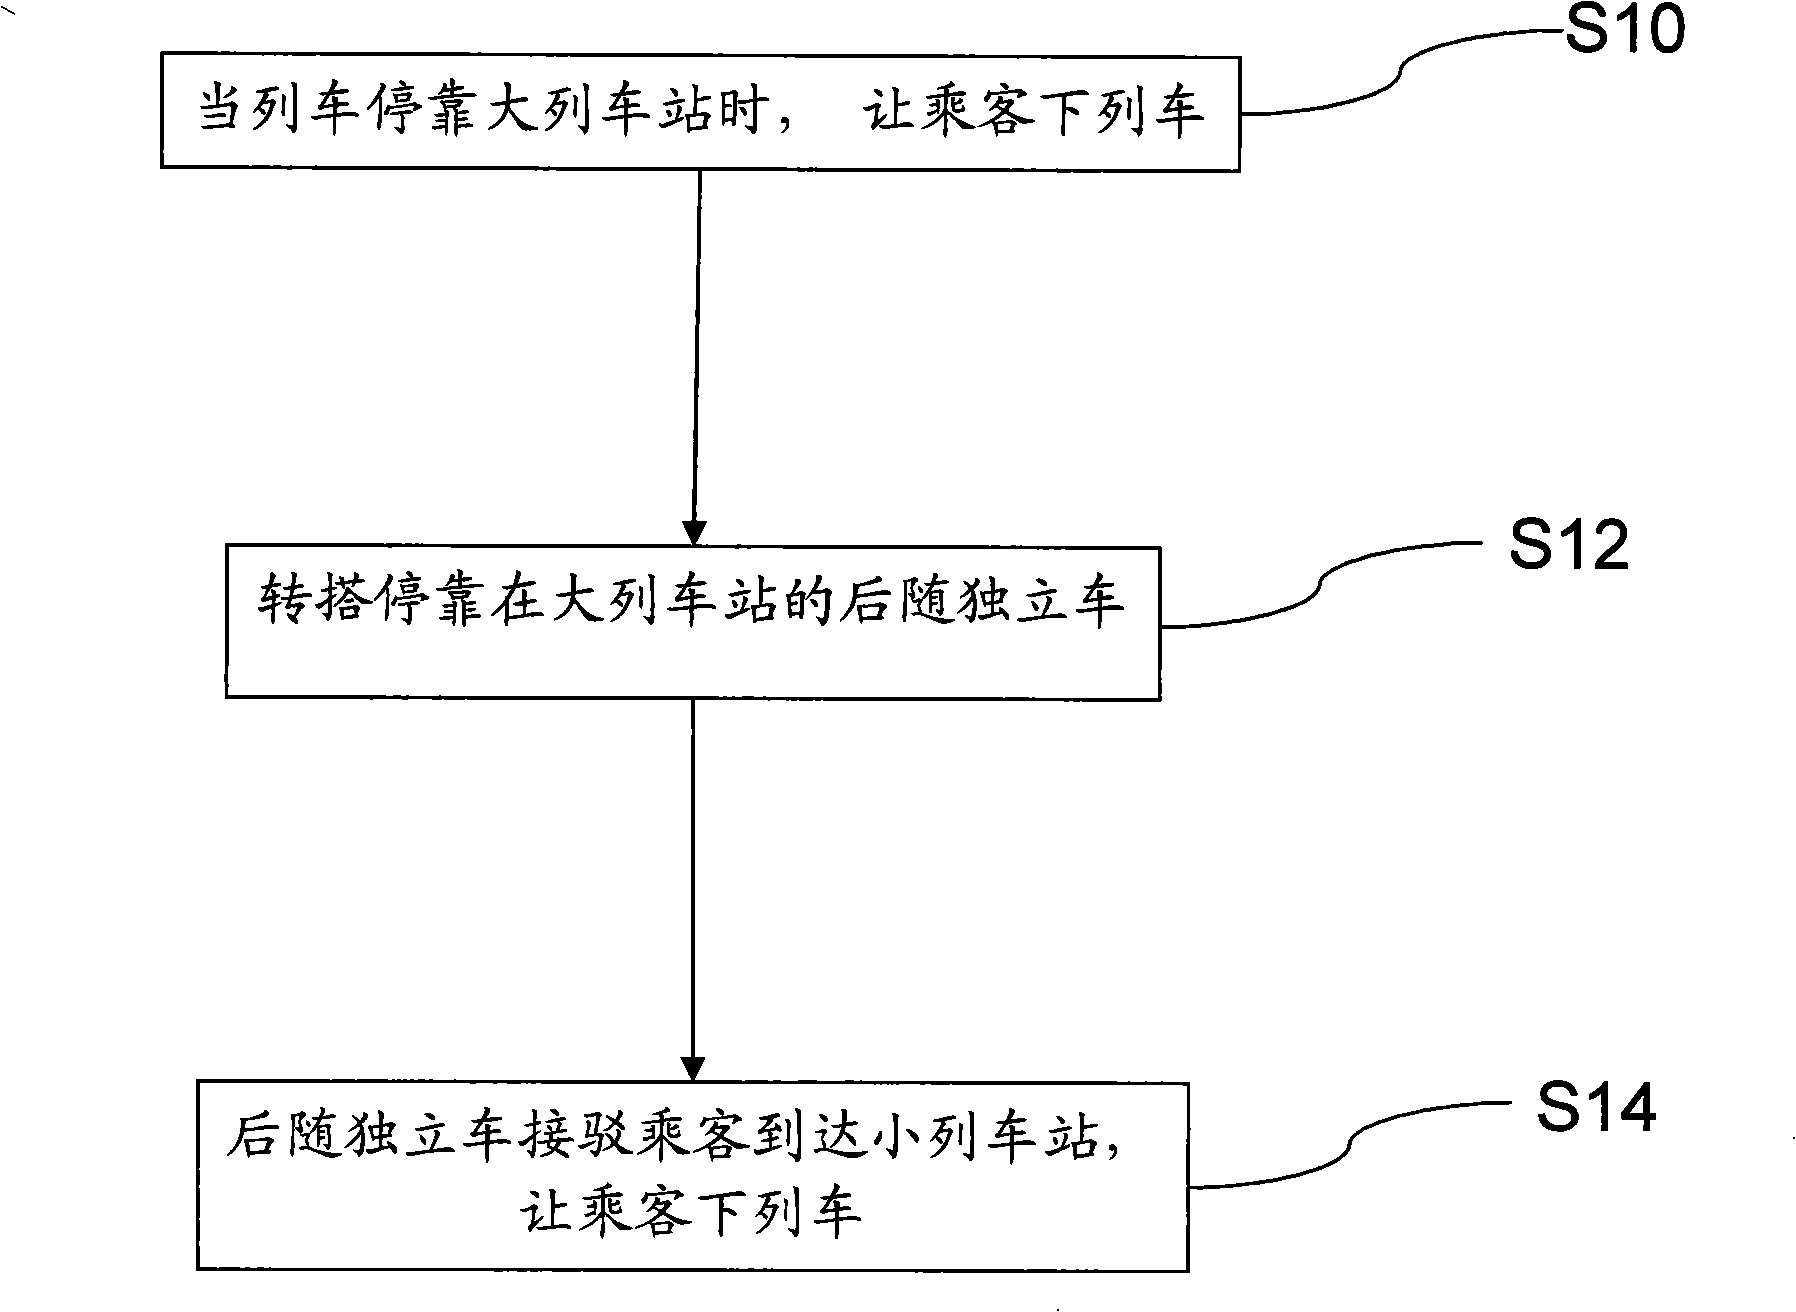 Method of transferring passenger with feeder vehicle when a train passes a station without stopping